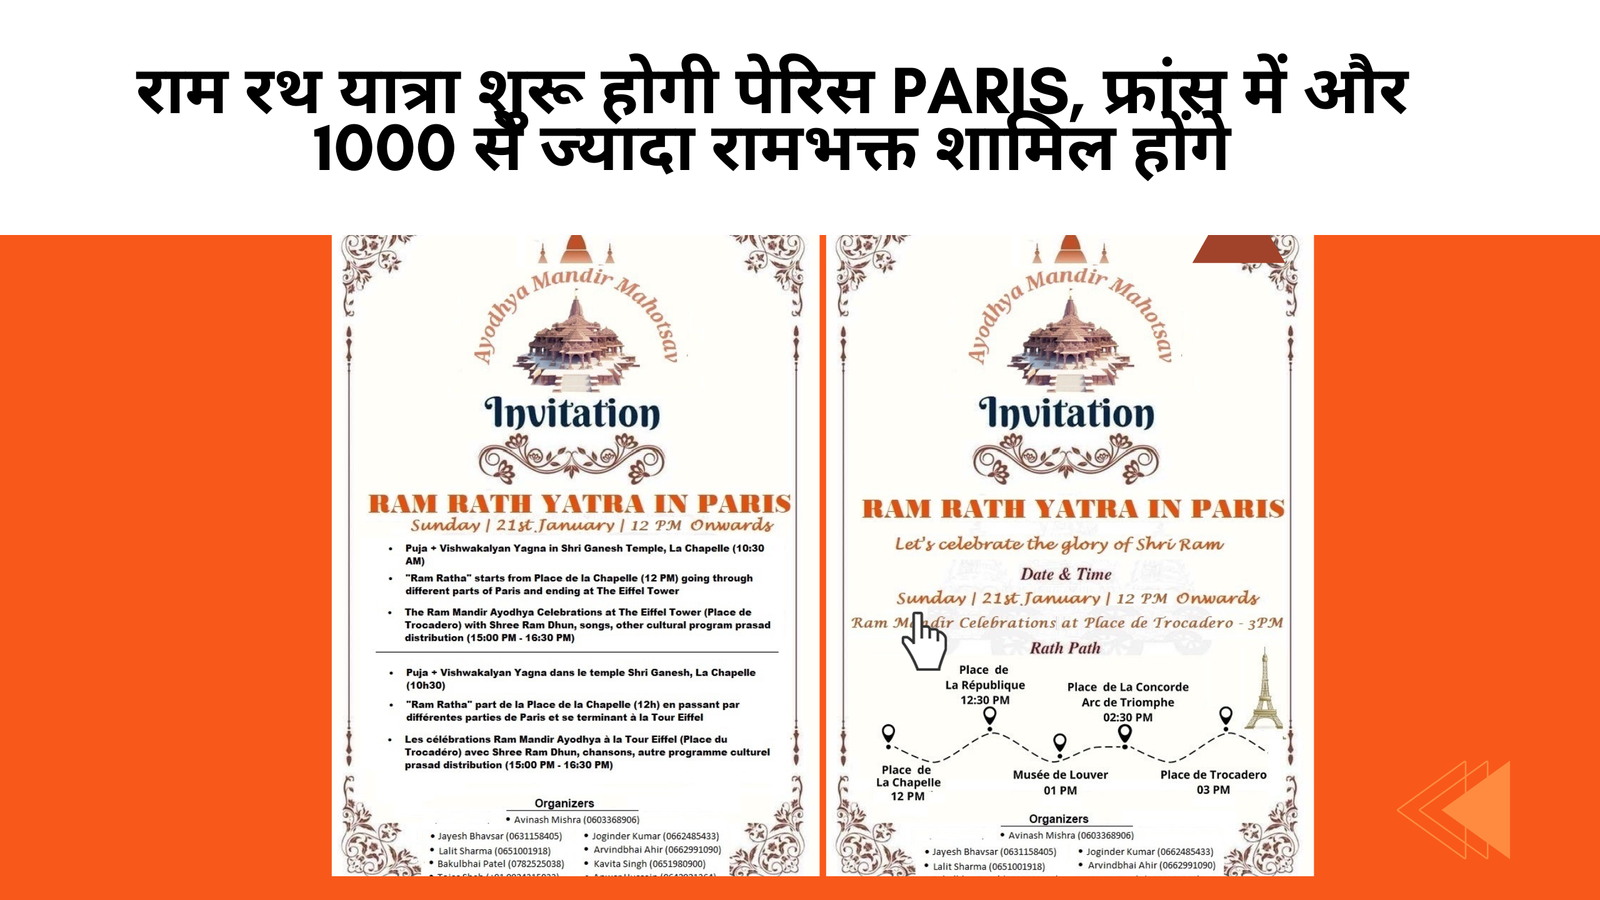 Ram Rath Yatra and Ayodhya Ram Mandir celebrations in Paris, France. 1000 of devotees will attend from across Europe